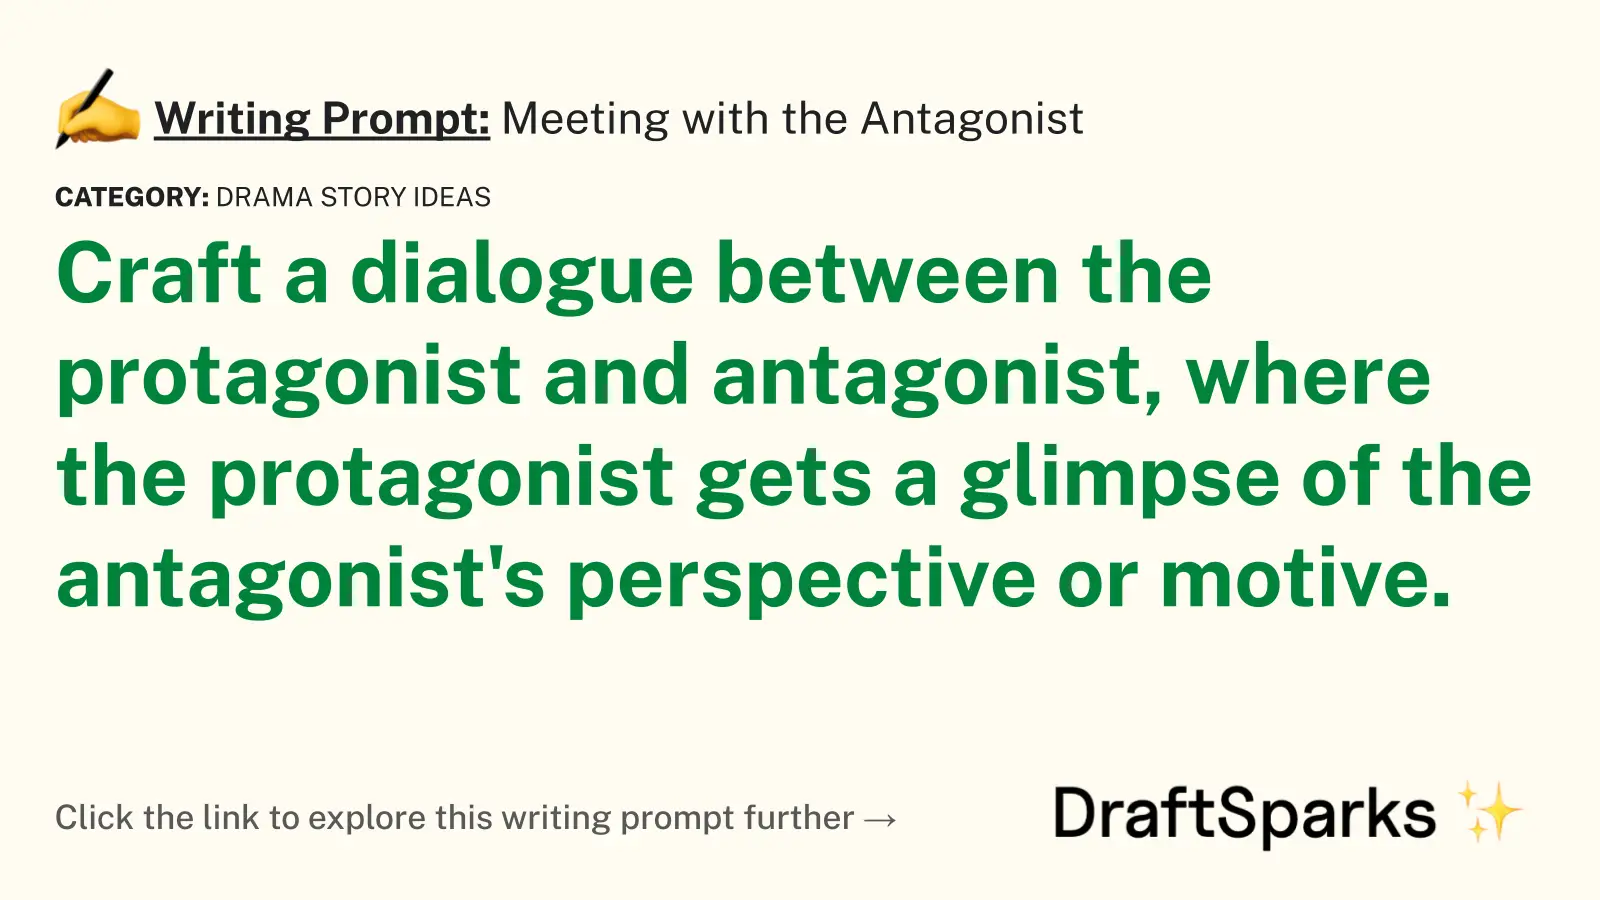 Meeting with the Antagonist